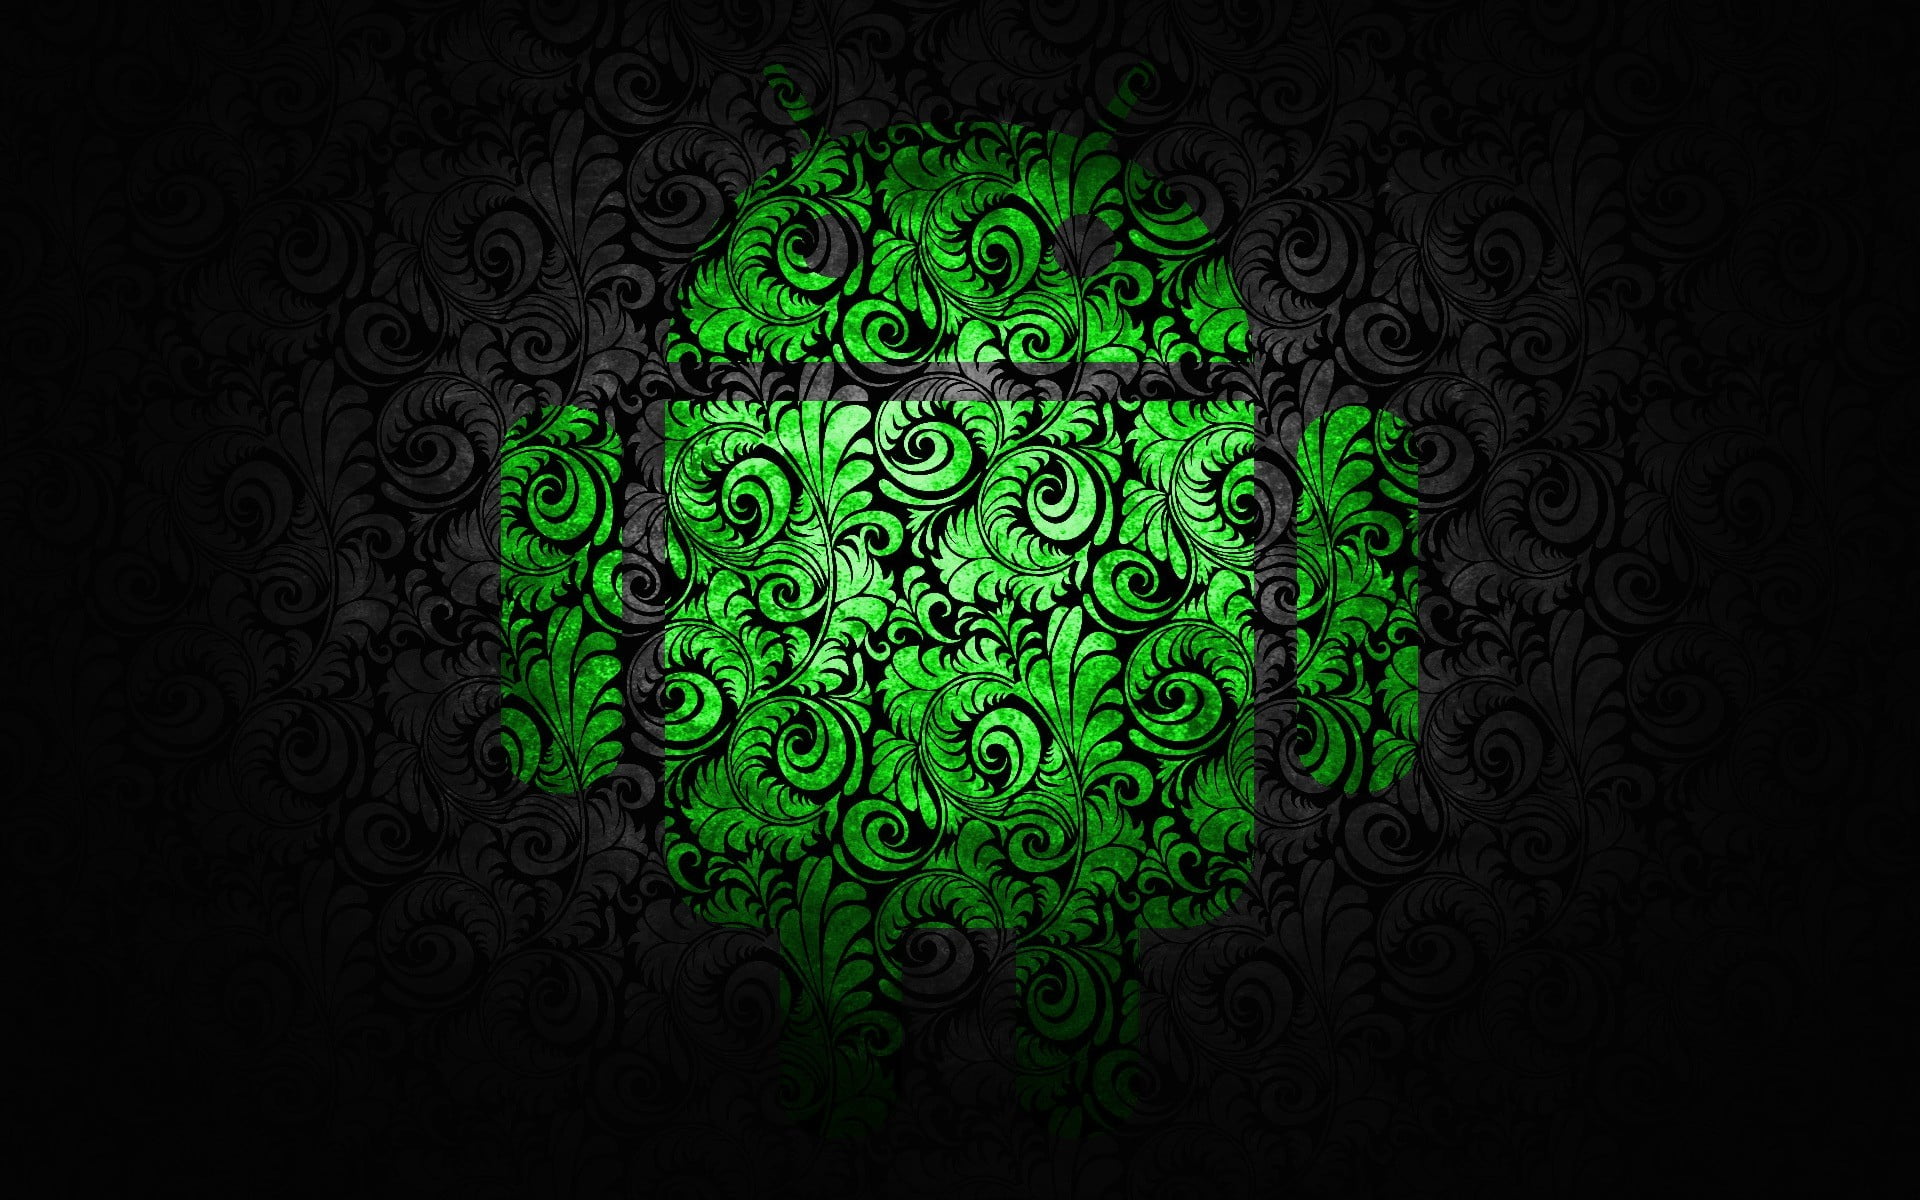 green Android logo illustration, Android (operating system), pattern